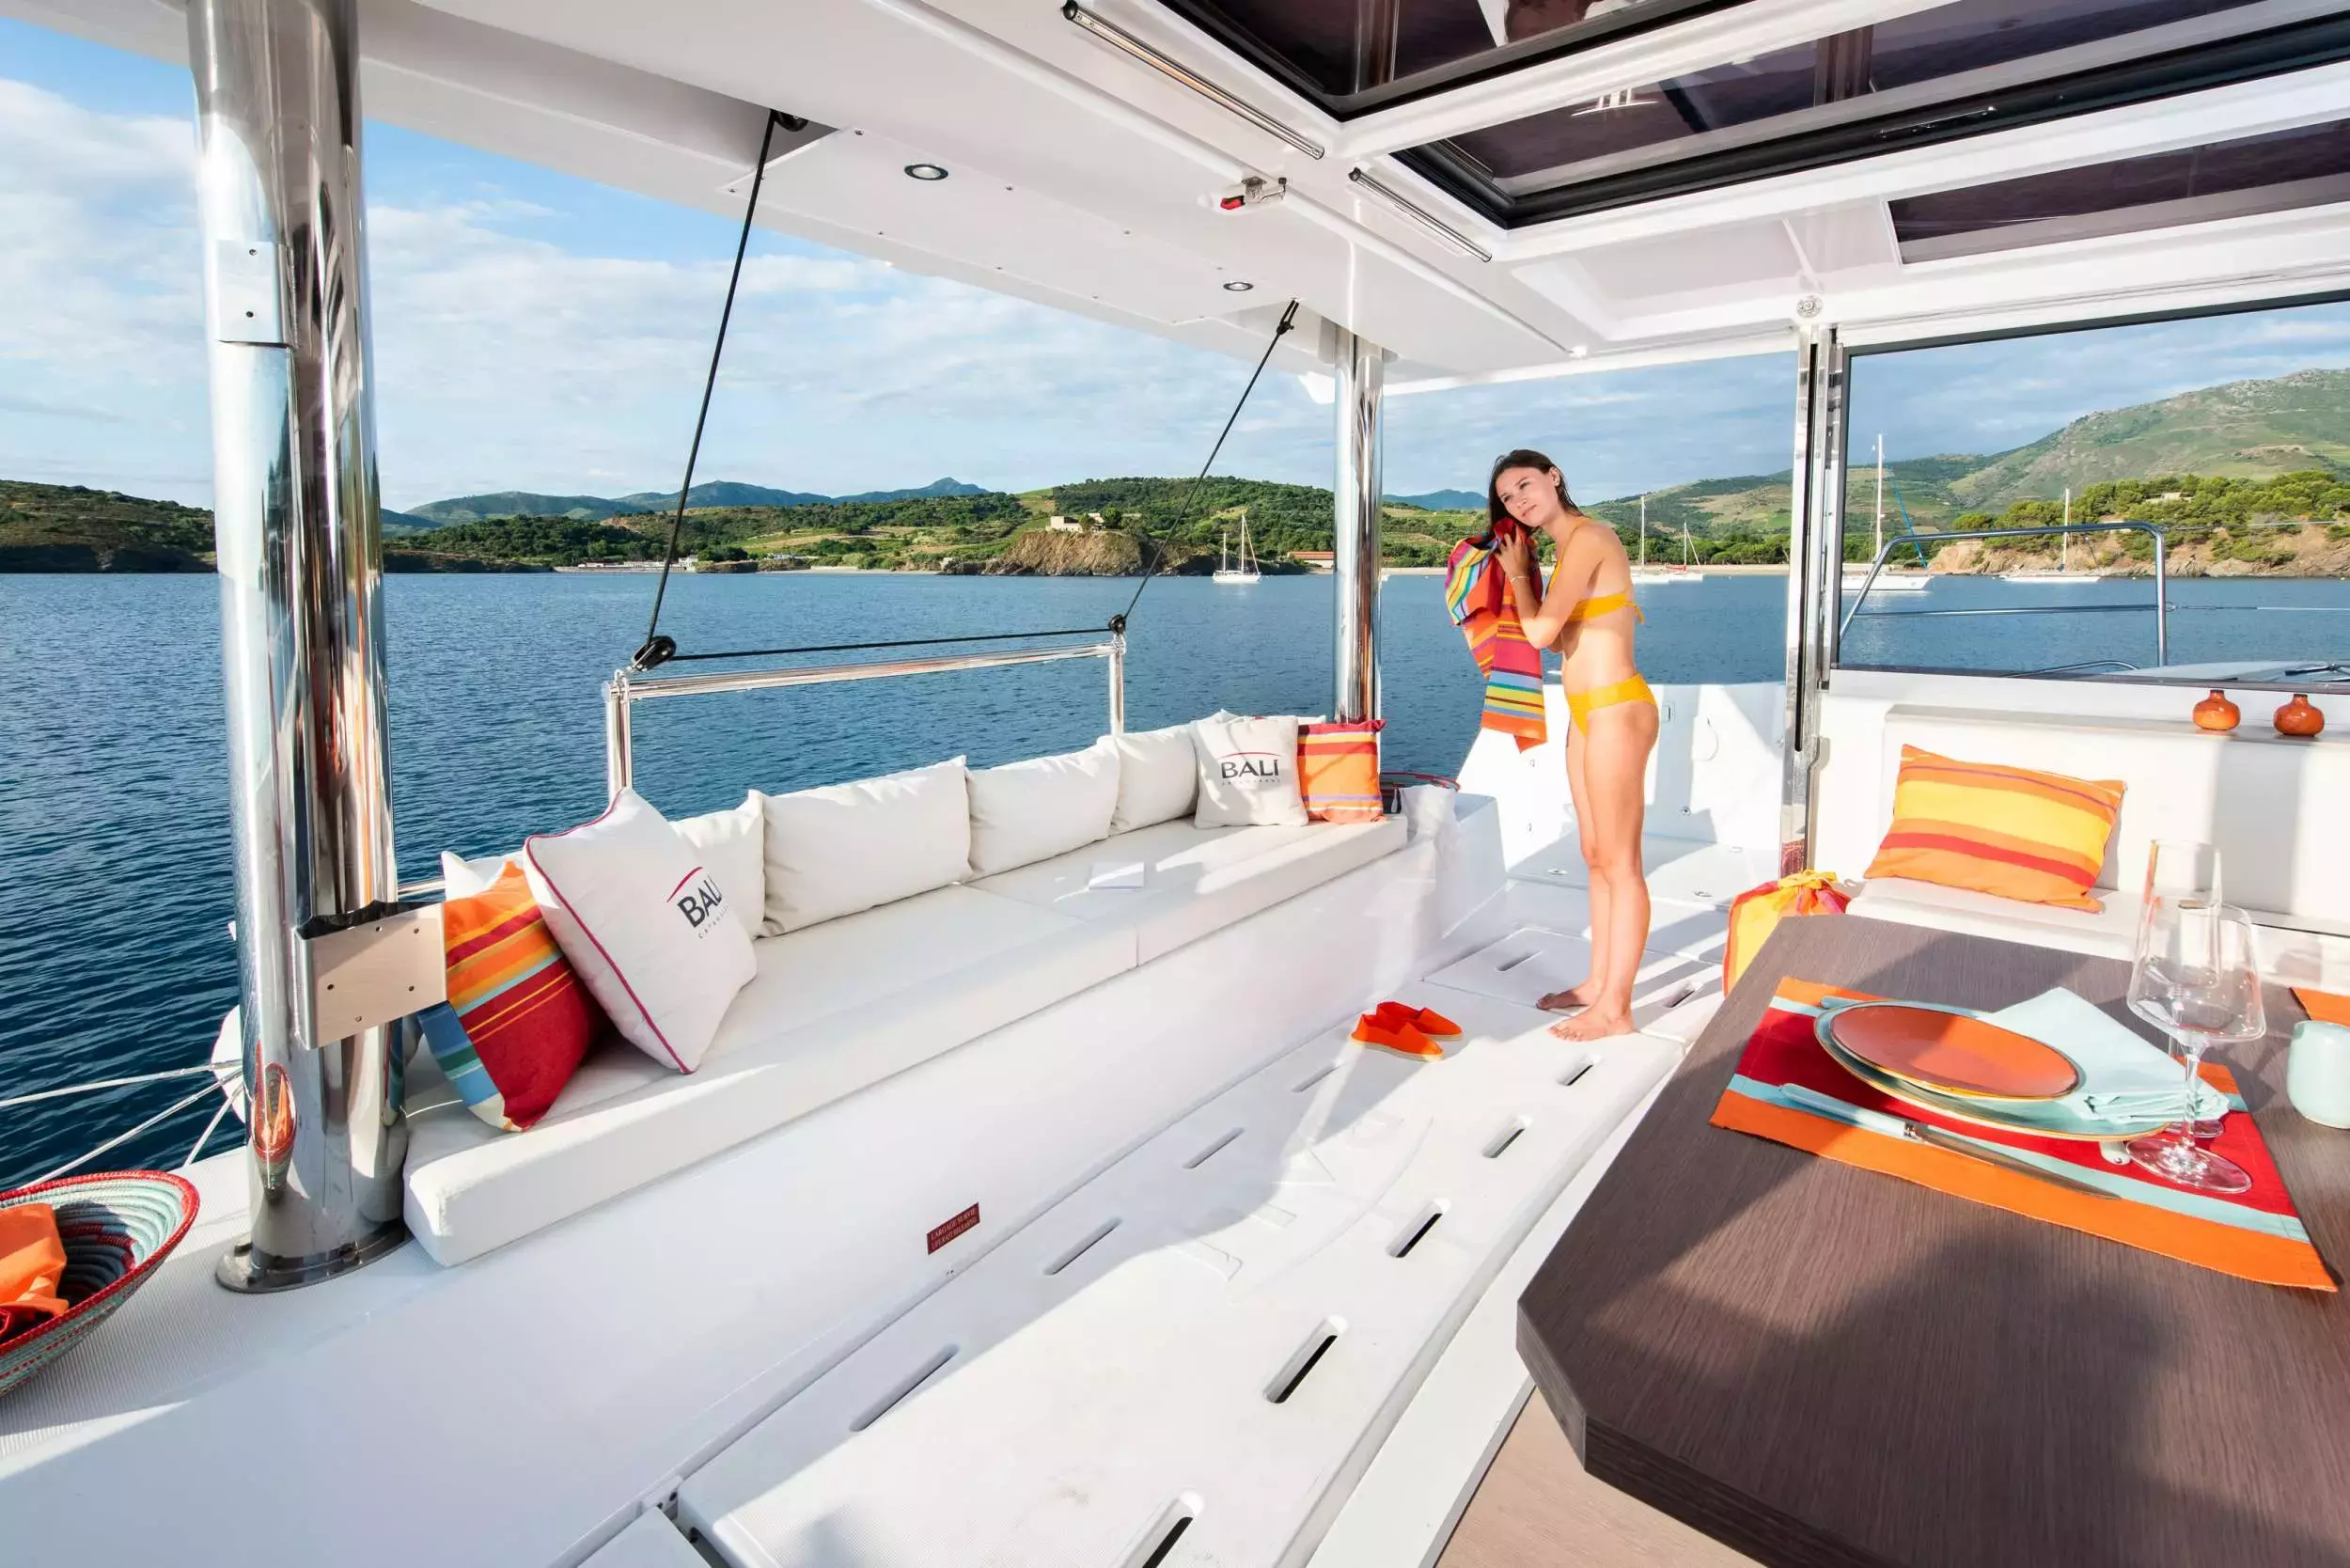 Yemaya by Bali Catamarans - Special Offer for a private Sailing Catamaran Charter in Menorca with a crew